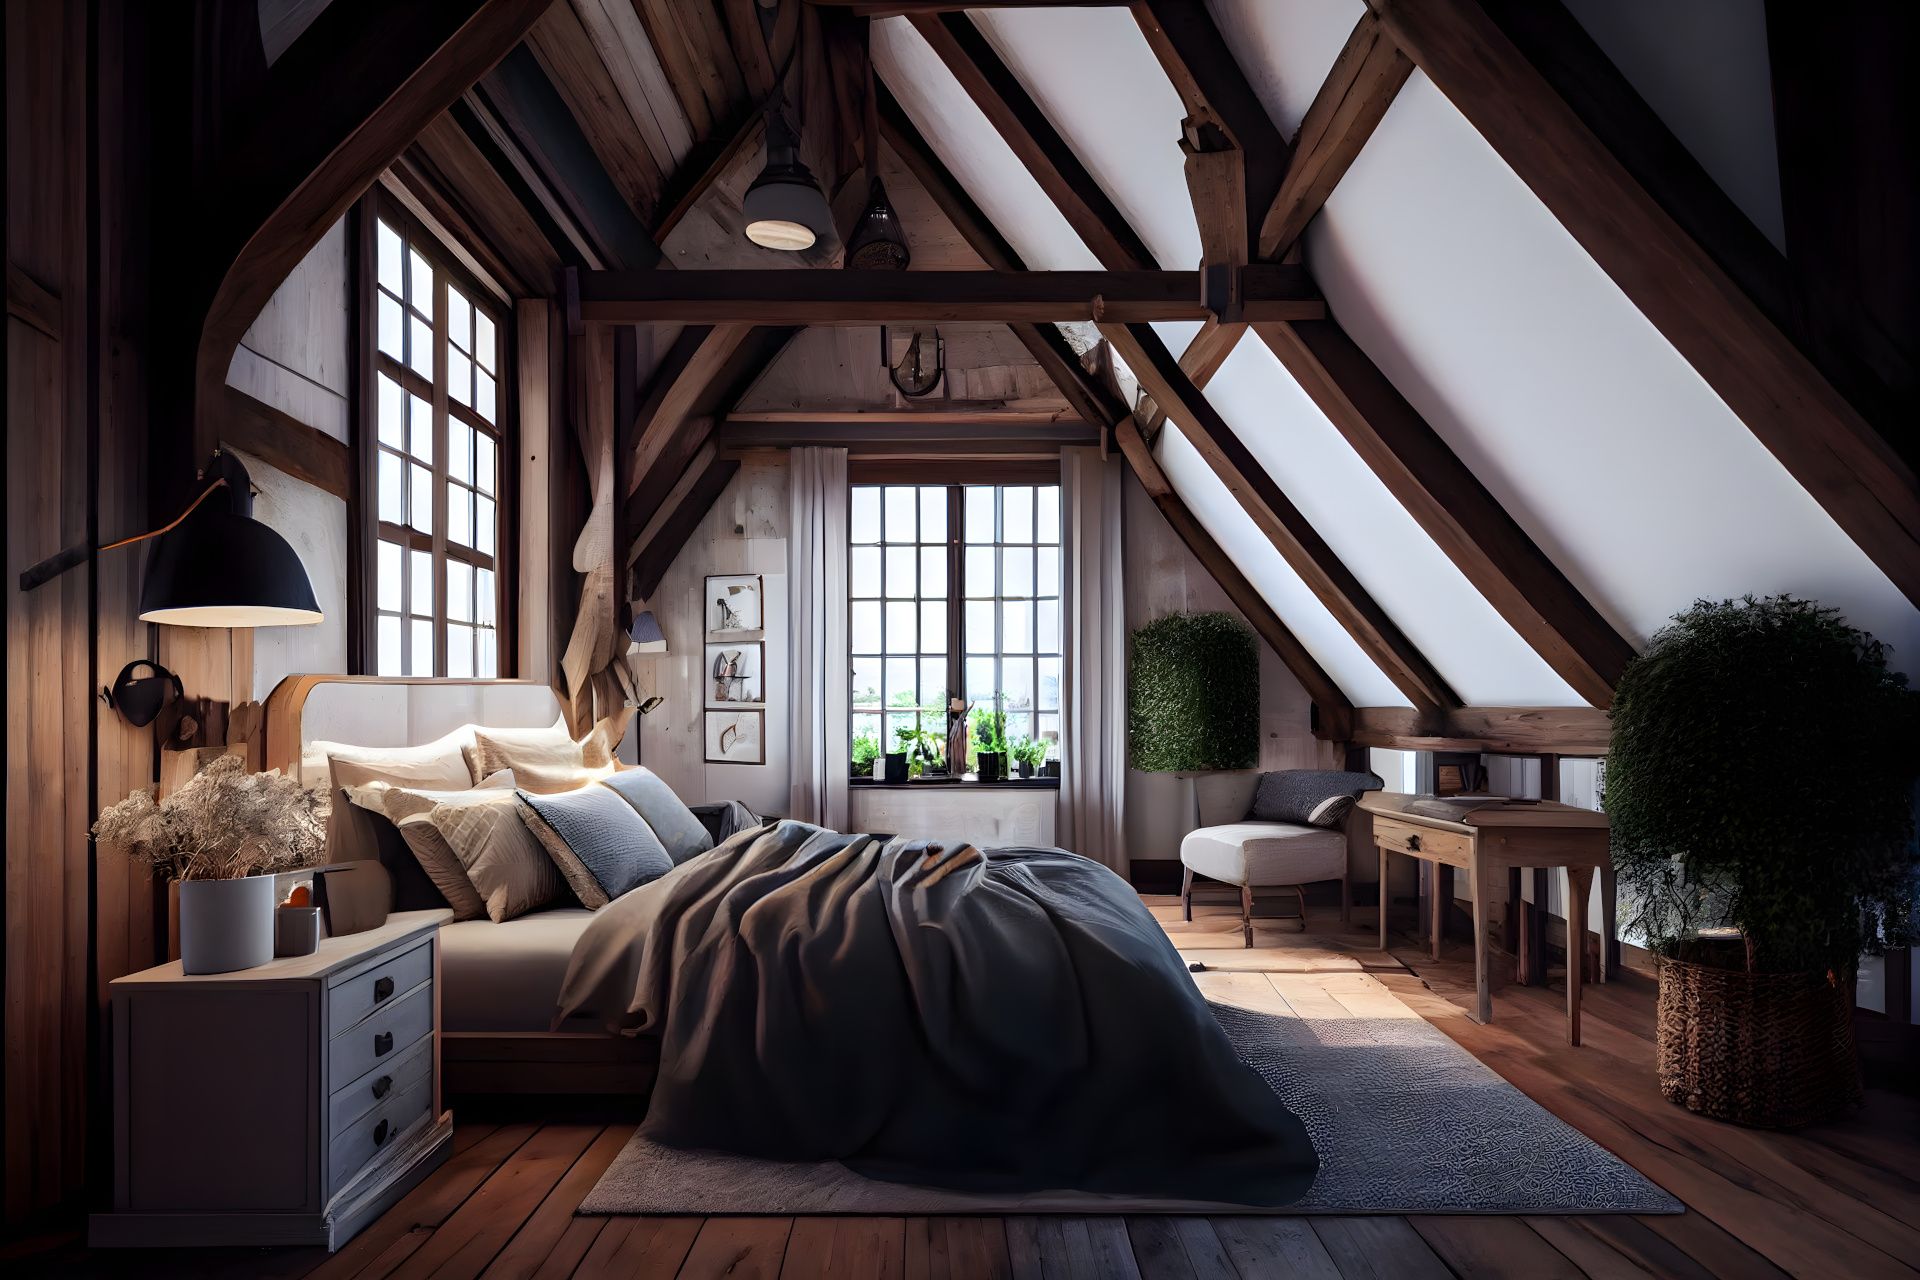 Bedroom with exposed wooden beams